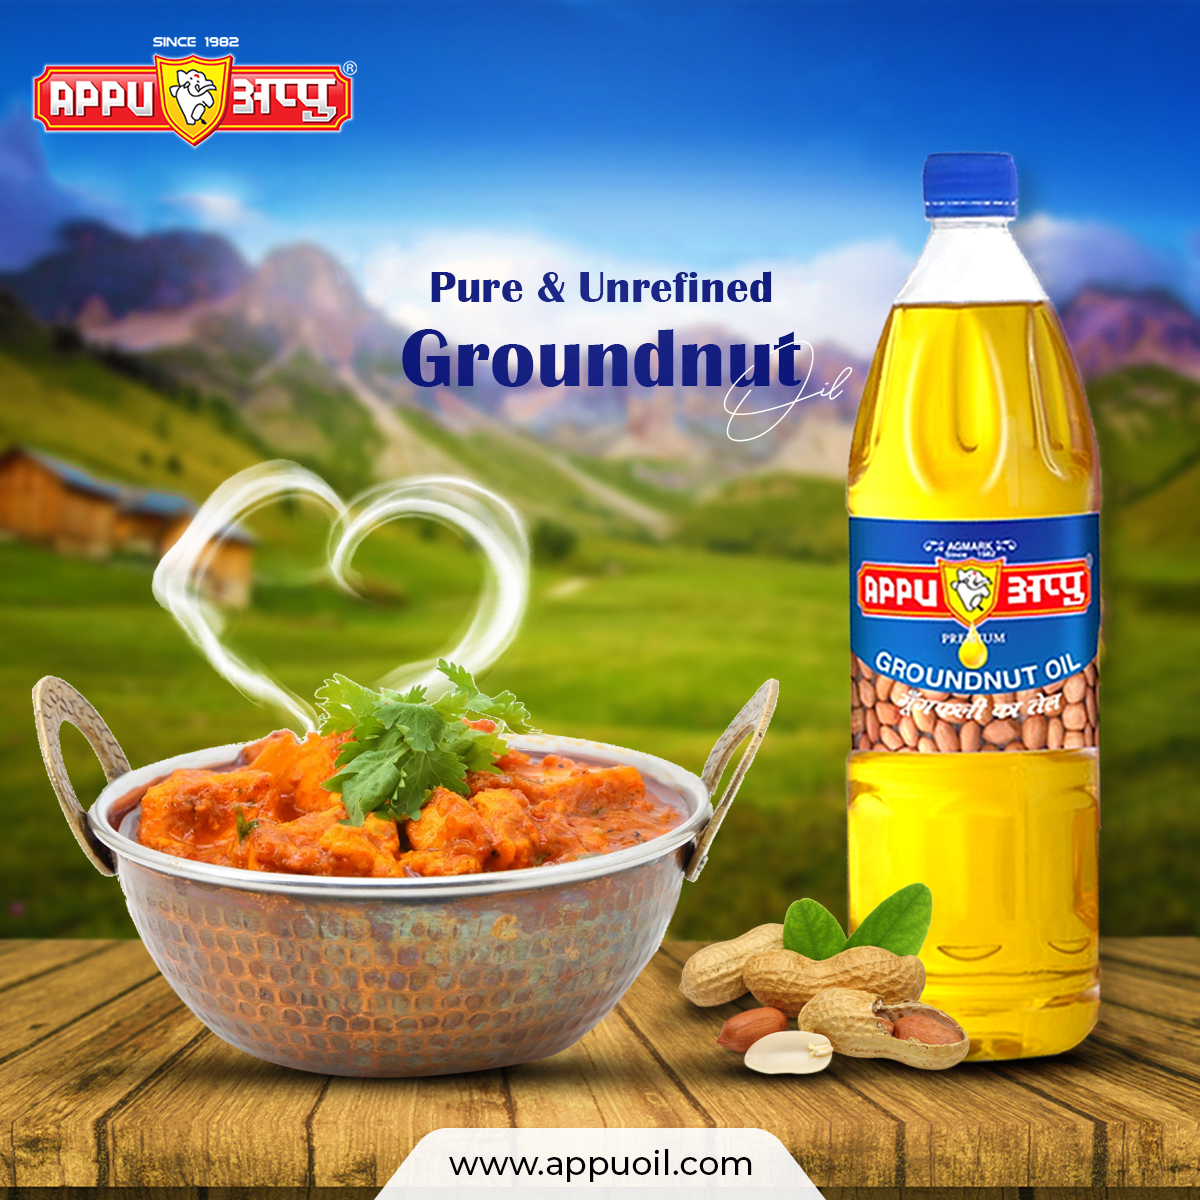 Groundnut Oil Manufacturers in India